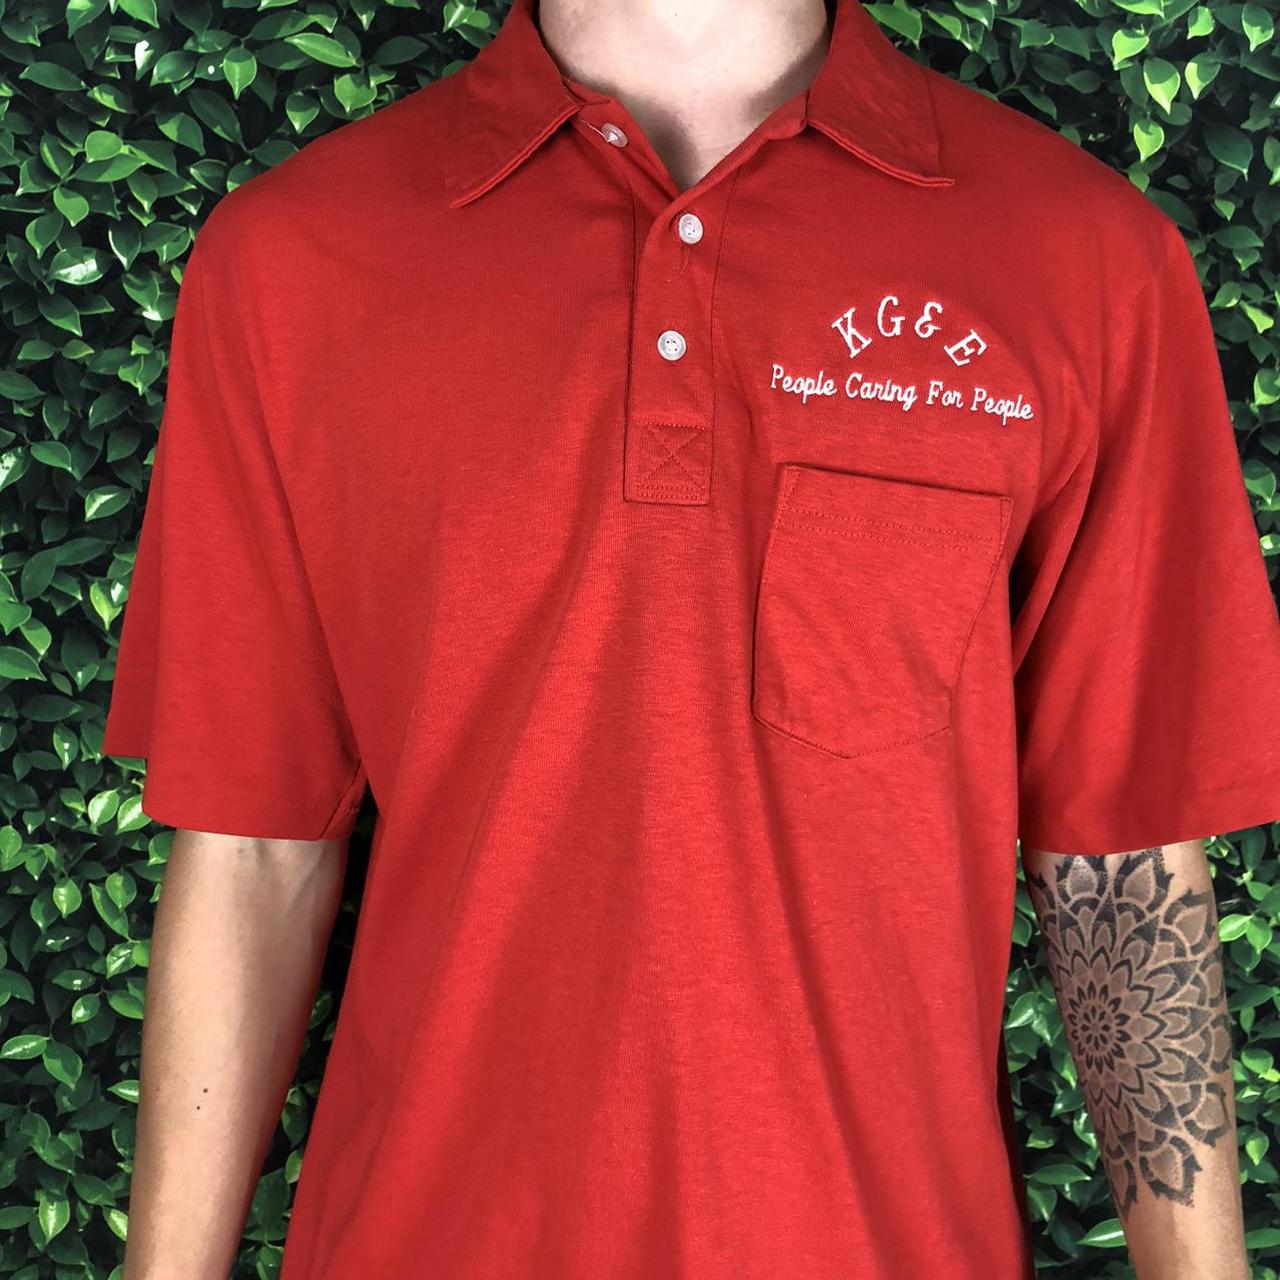 American Vintage Men's Red and White Polo-shirts